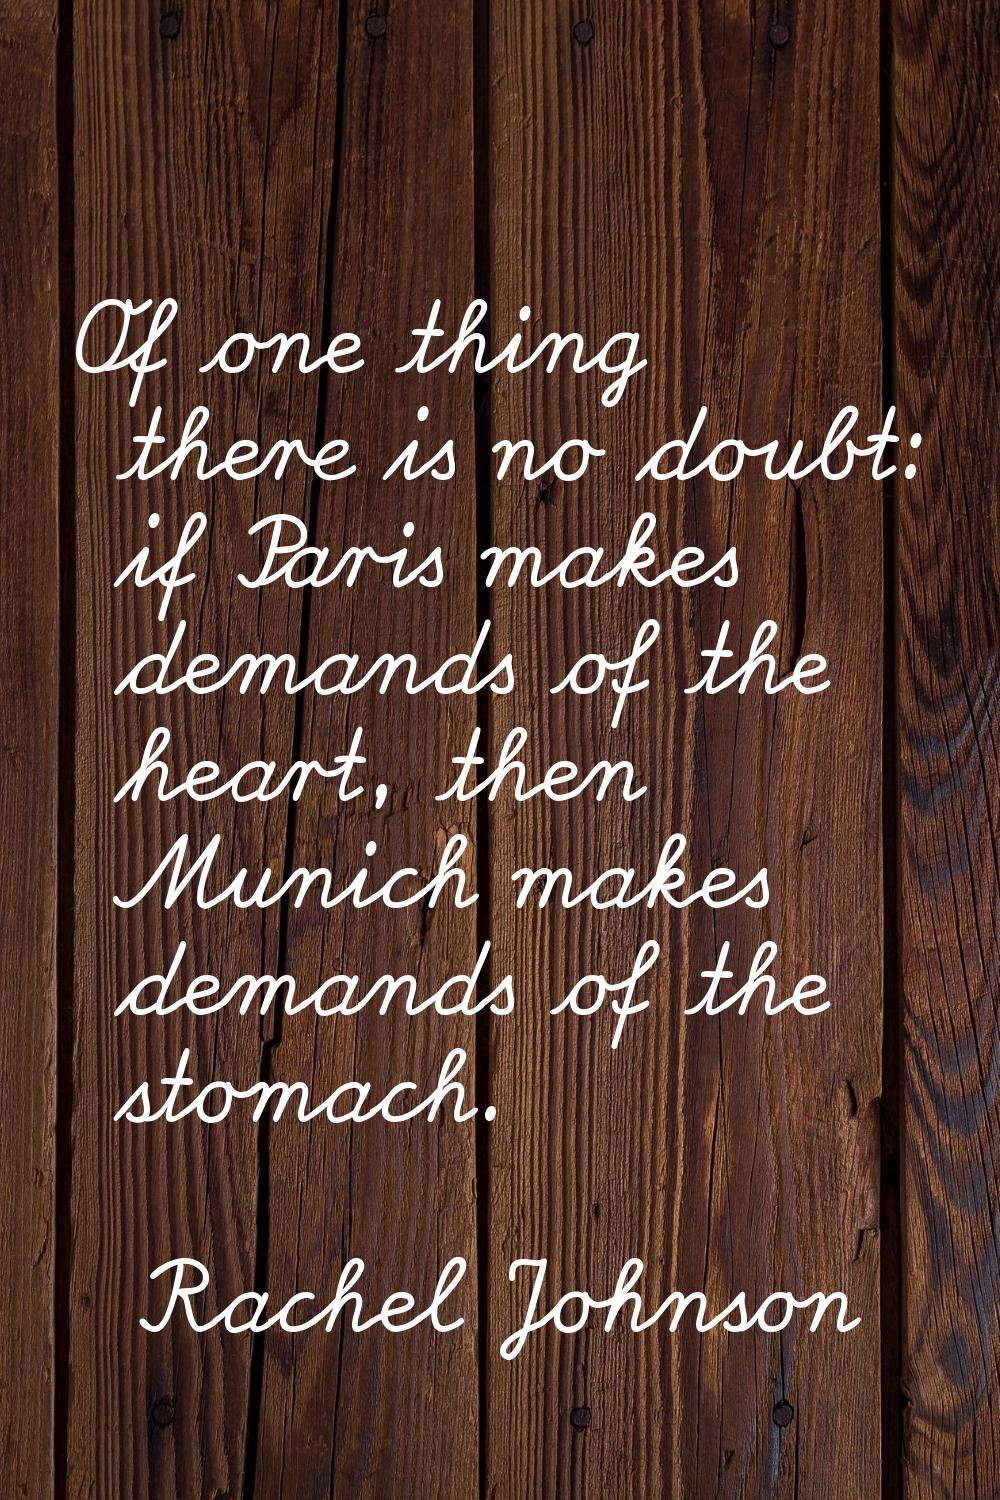 Of one thing there is no doubt: if Paris makes demands of the heart, then Munich makes demands of t